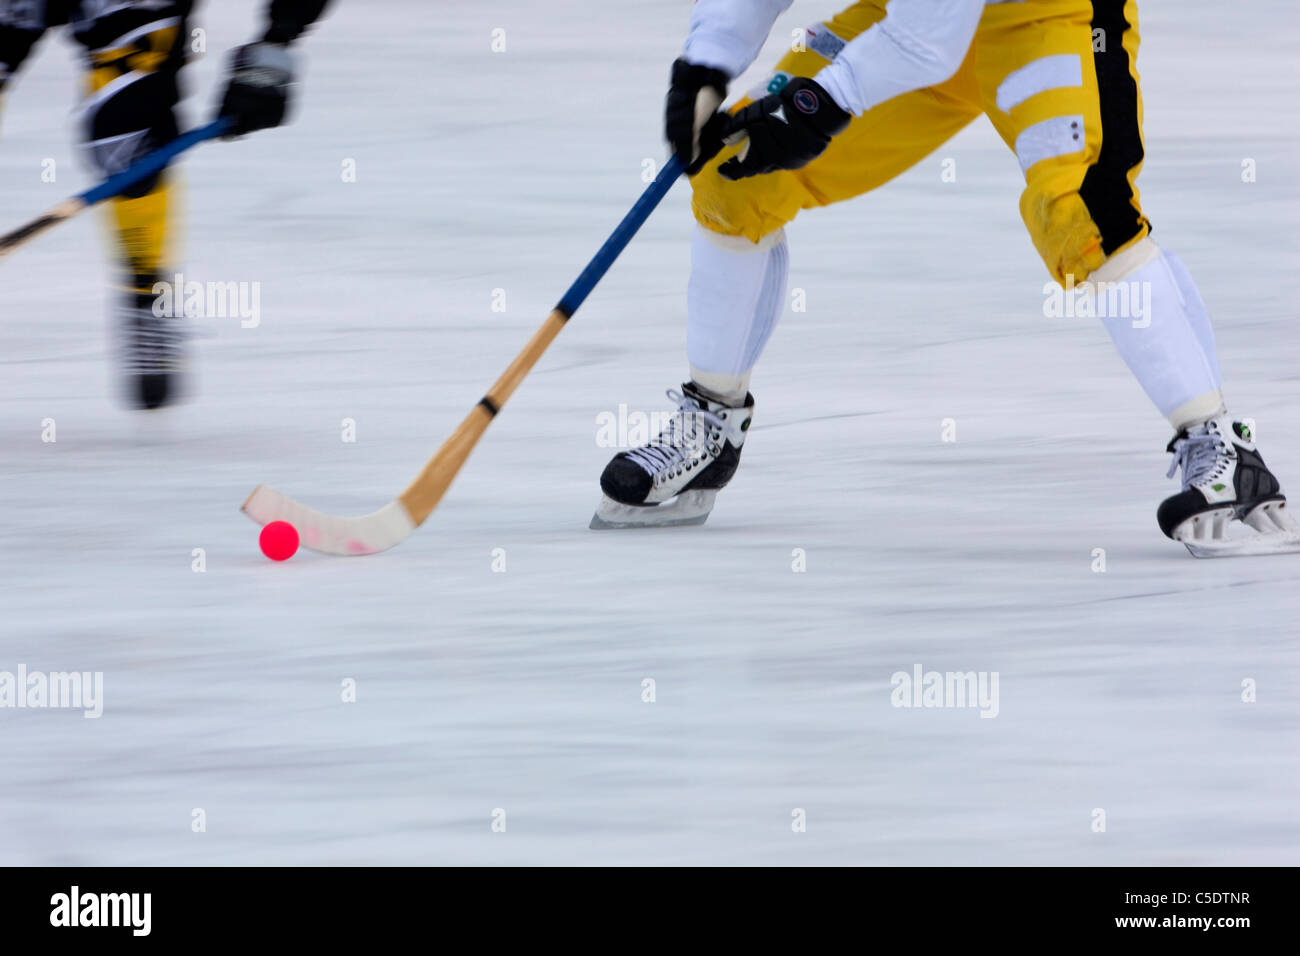 Low section of bandy on ice in blurred motion Stock Photo